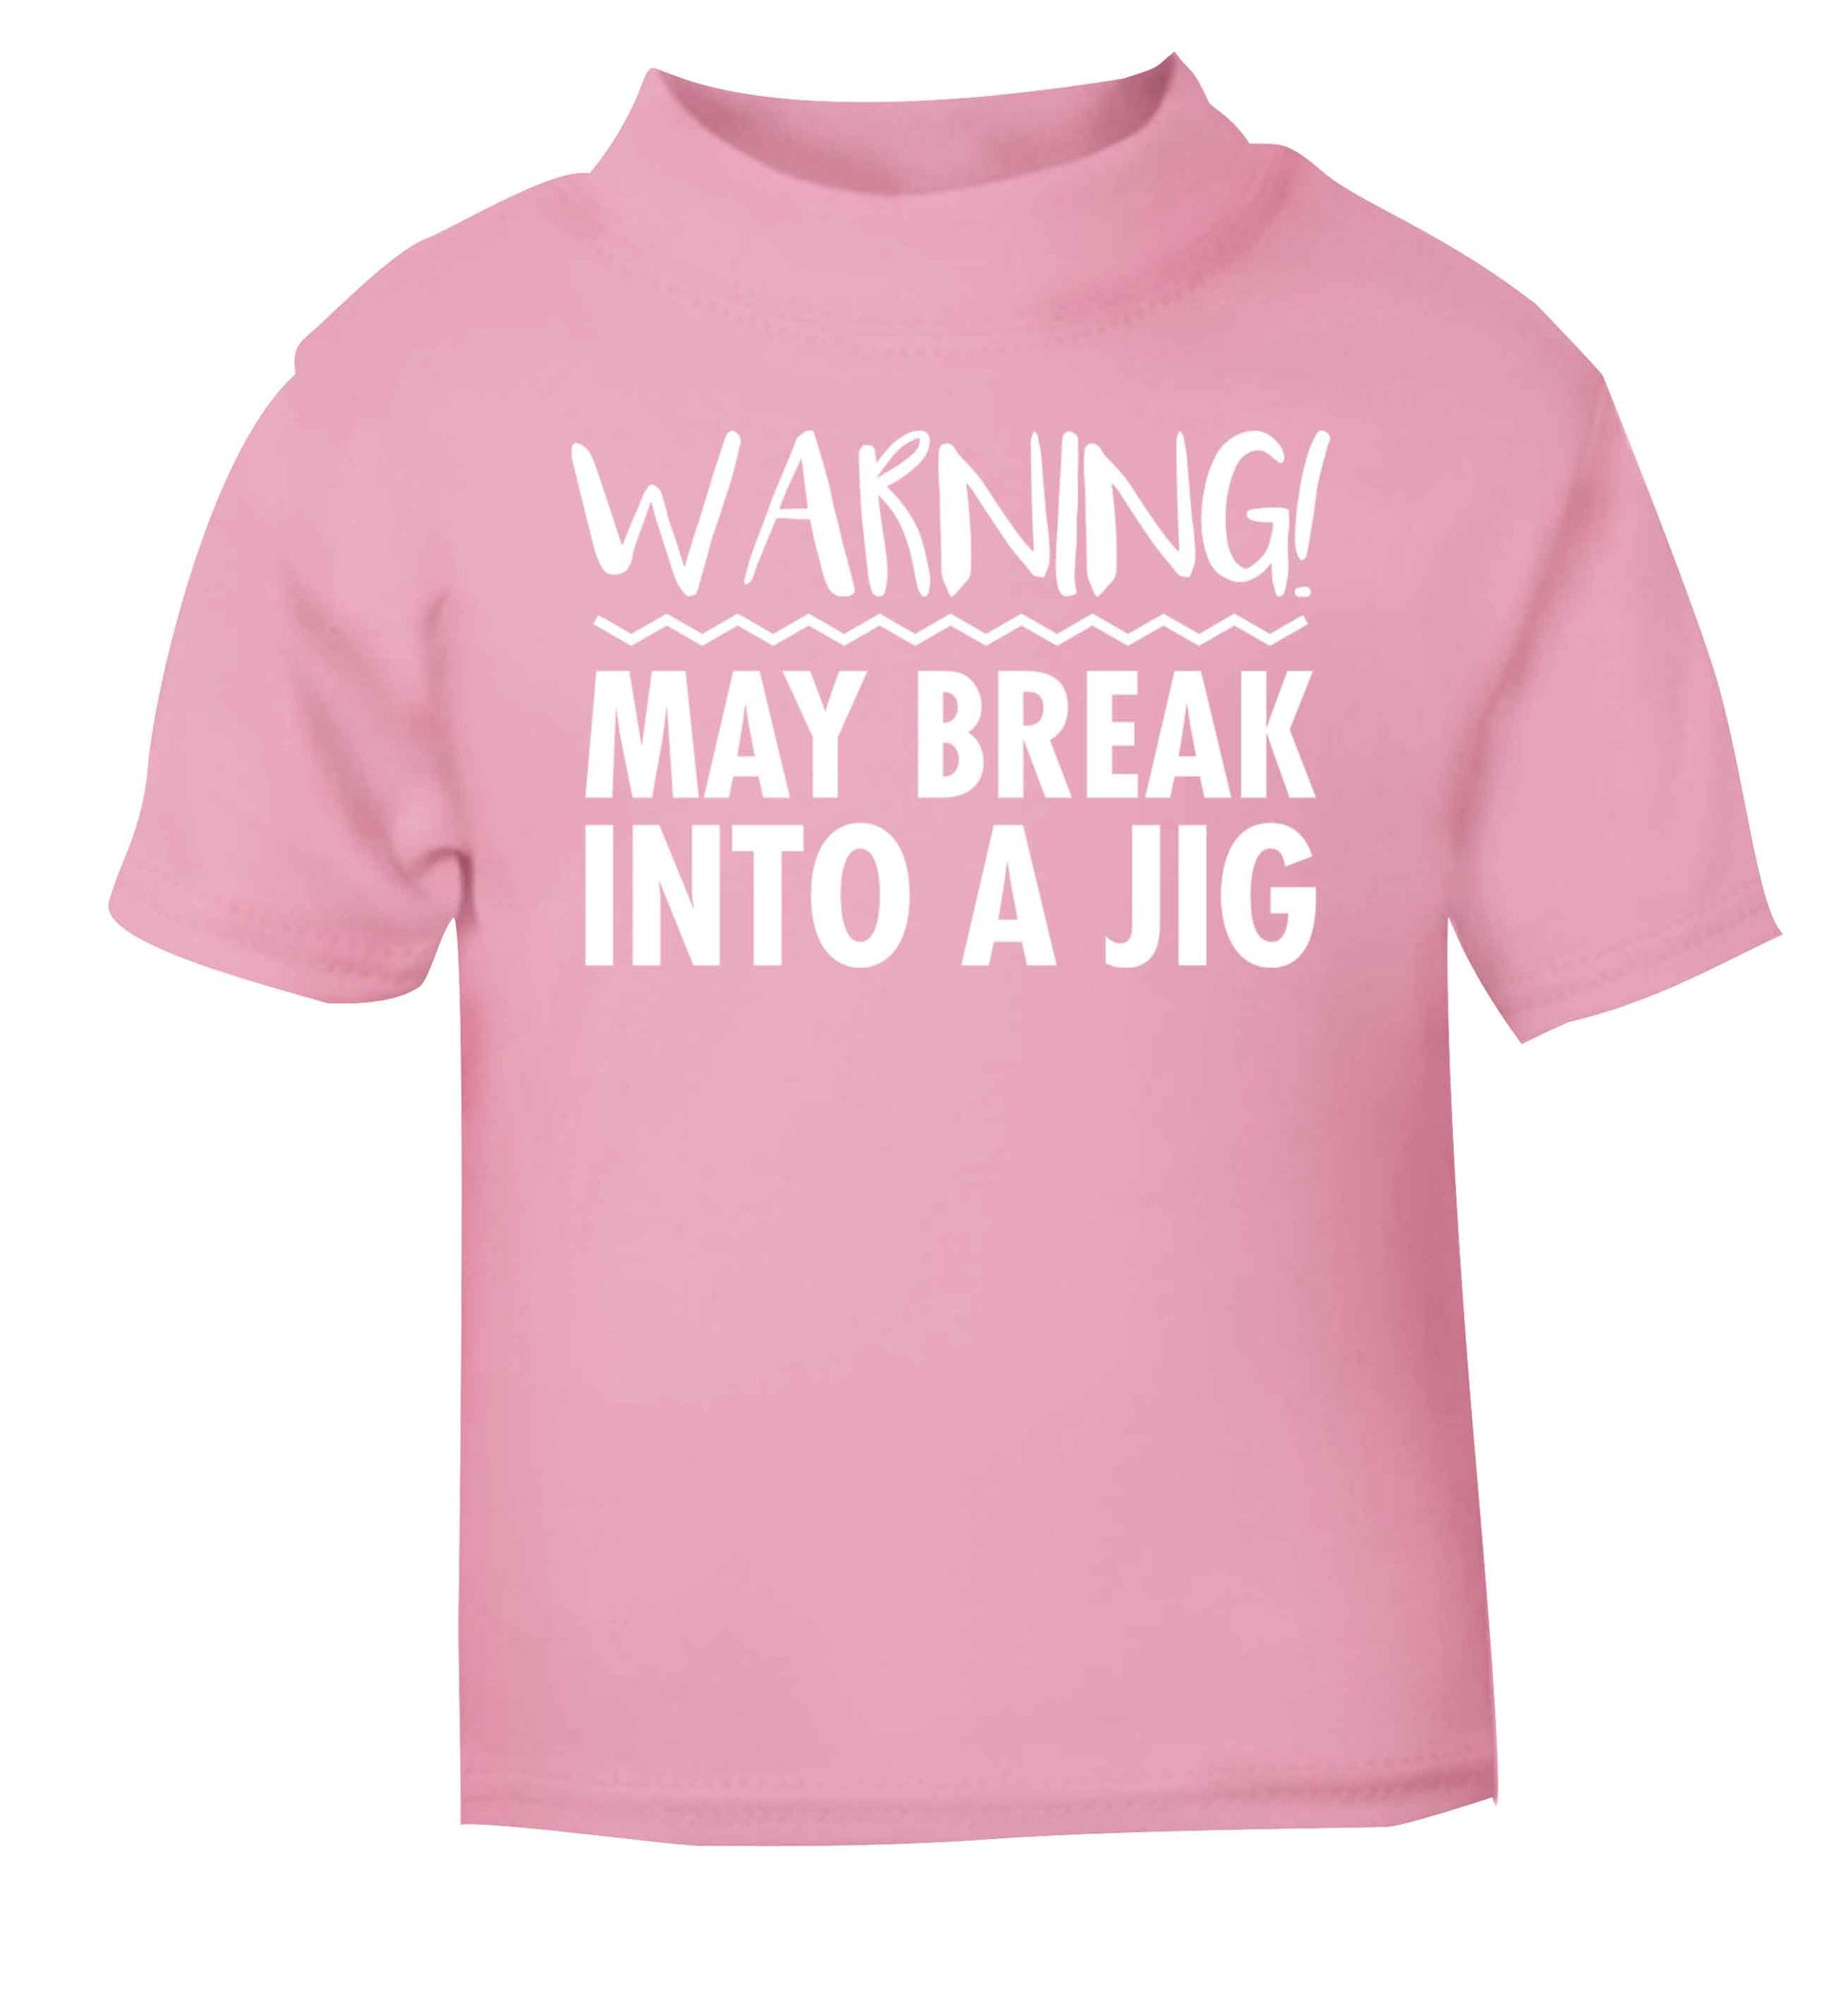 Warning may break into a jig light pink baby toddler Tshirt 2 Years